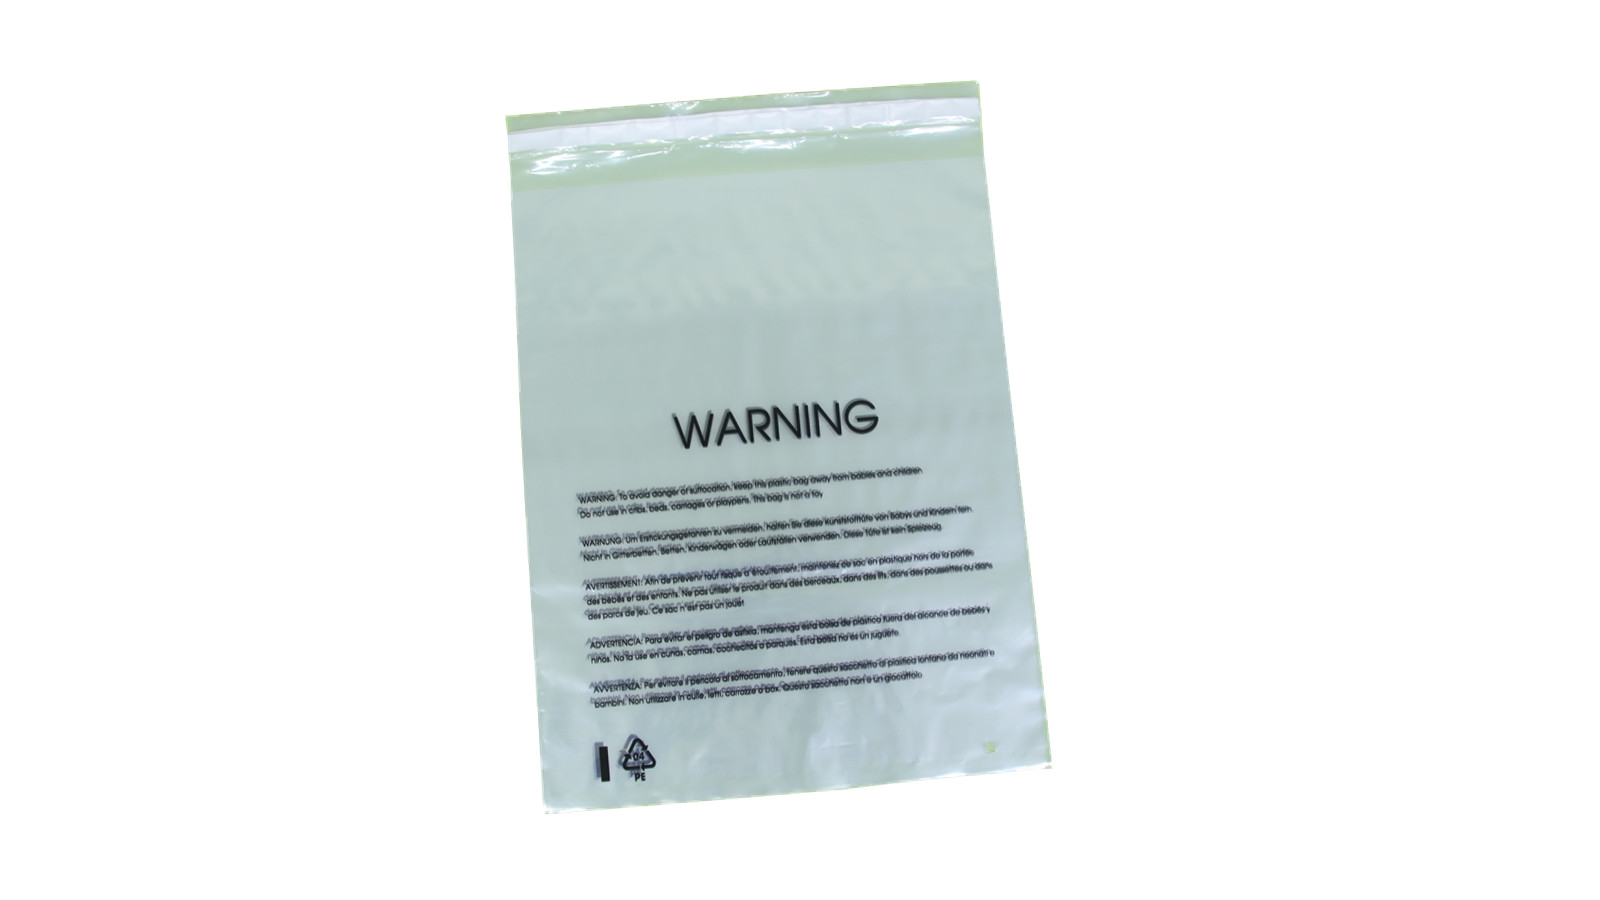 High quality Warnings Bag manufacturer from China